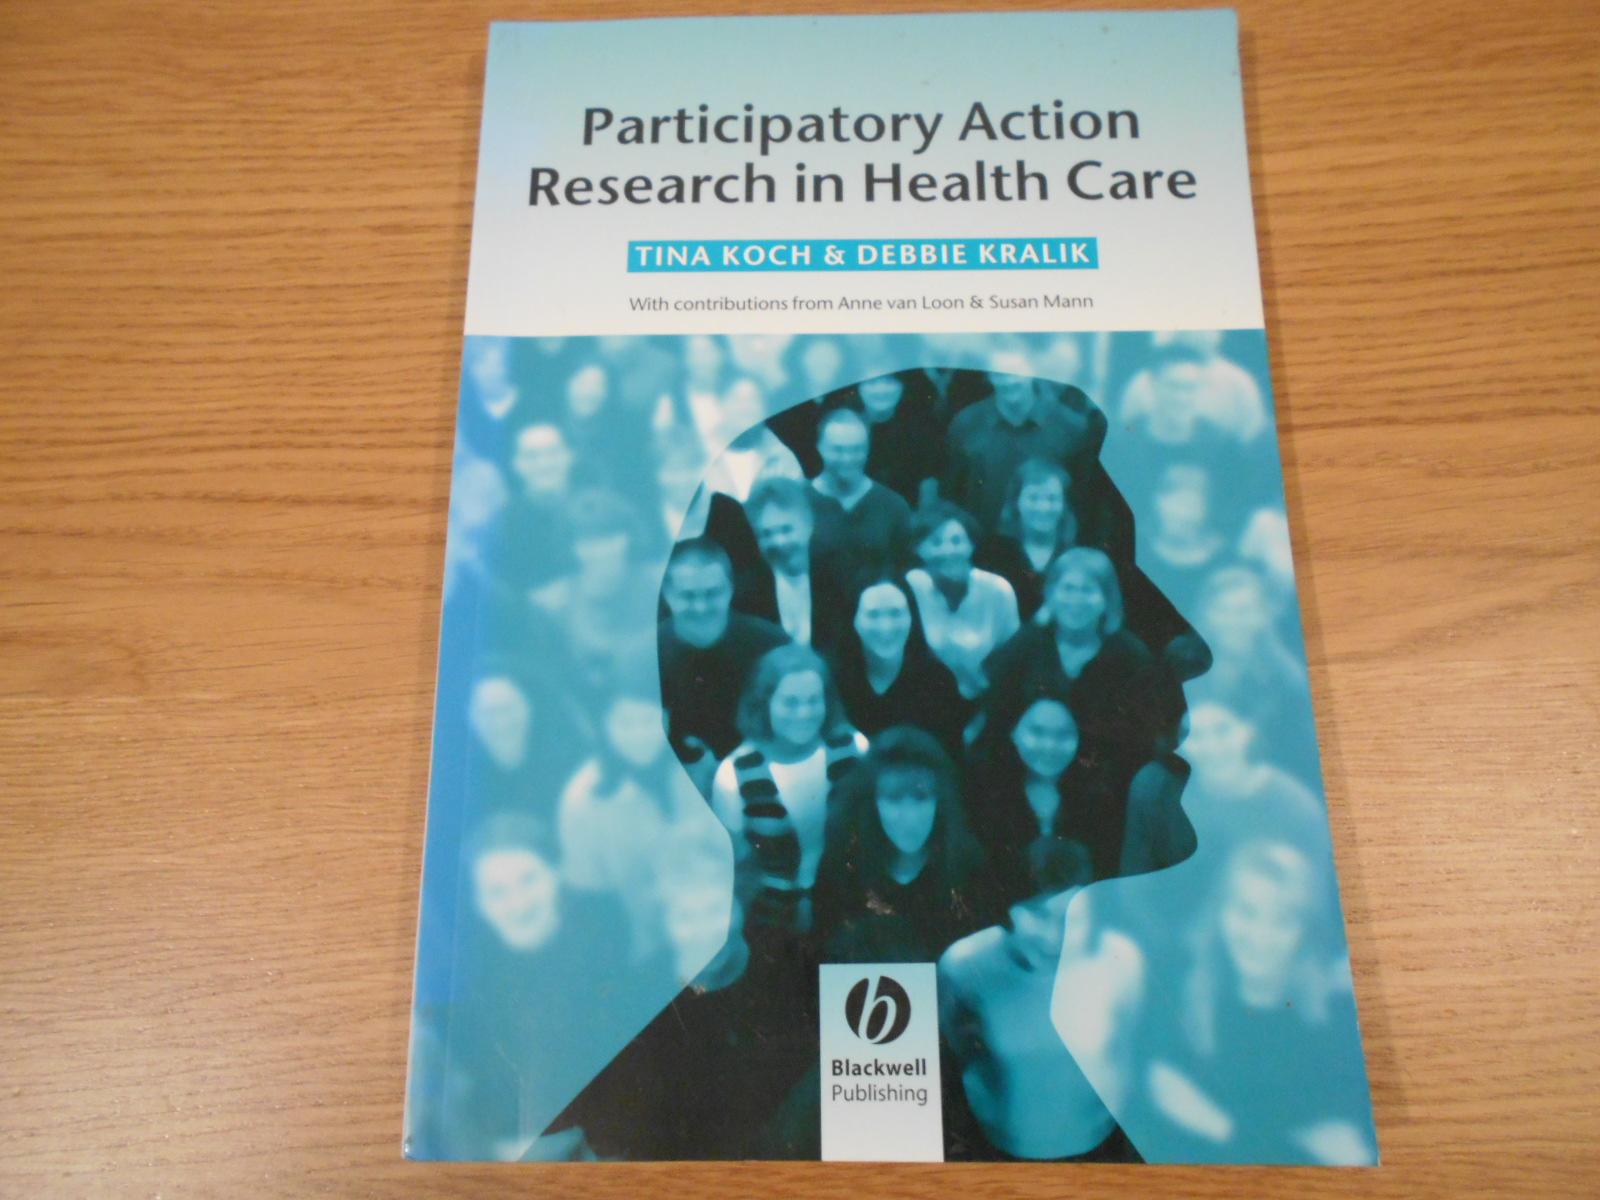 Participatory action research in health care. With contributions from Anne van Loon & Susan Mann. - Koch, Tina and Kralik, Debbie